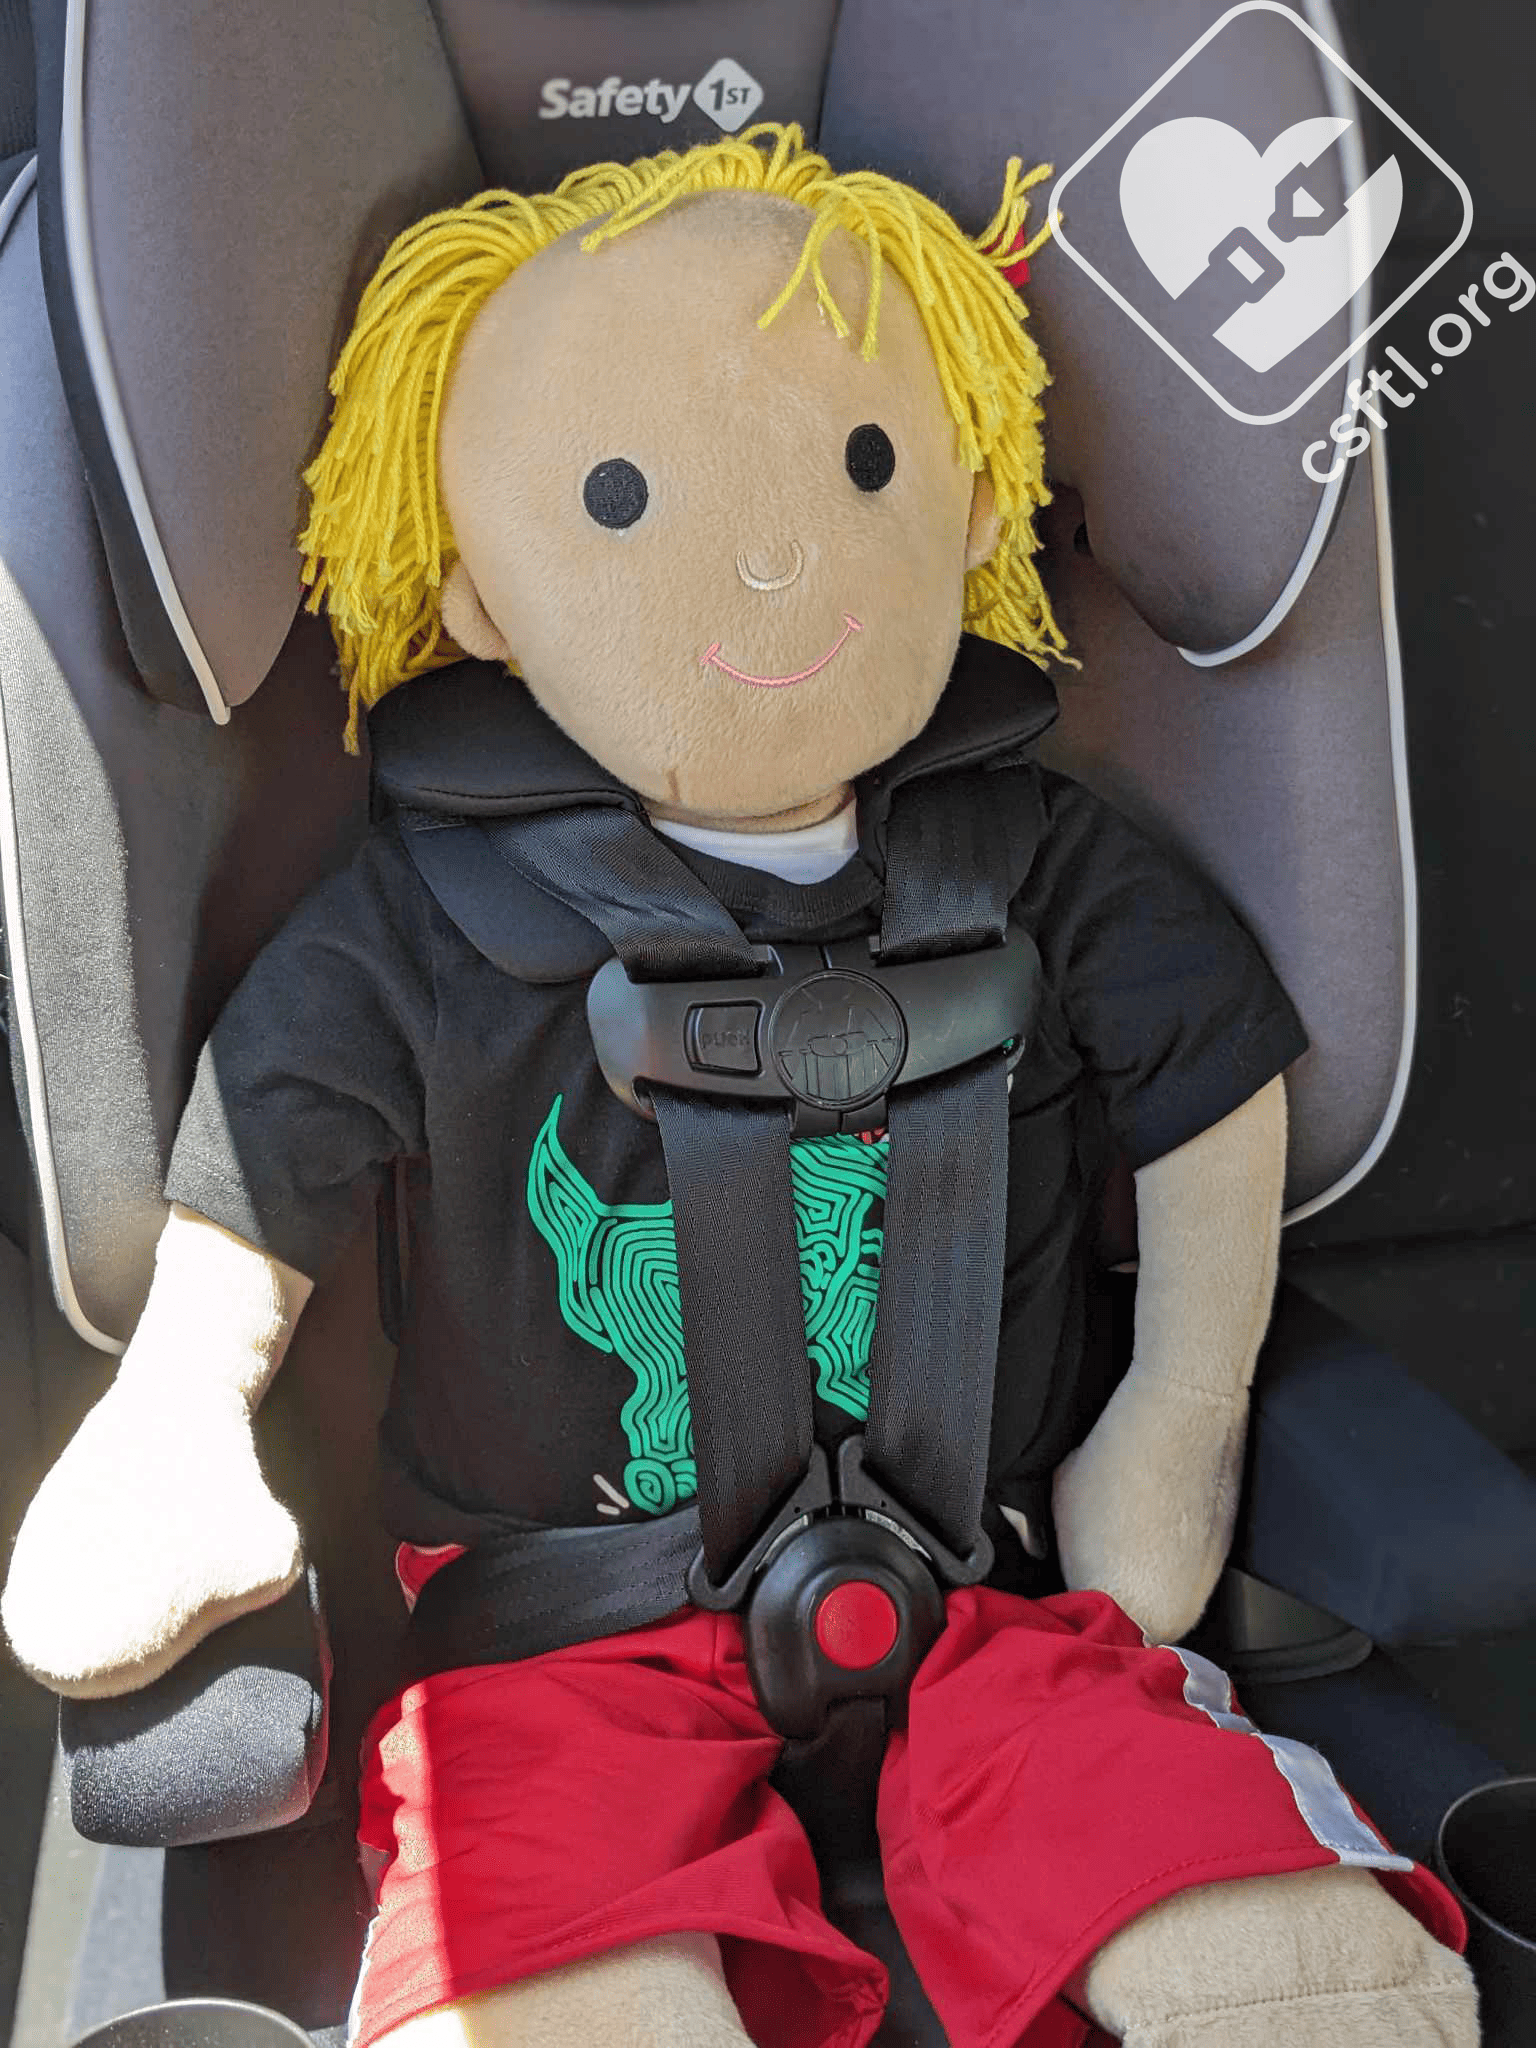 Safety 1st Greener Baby Comfort Ride Combination Car Seat Review